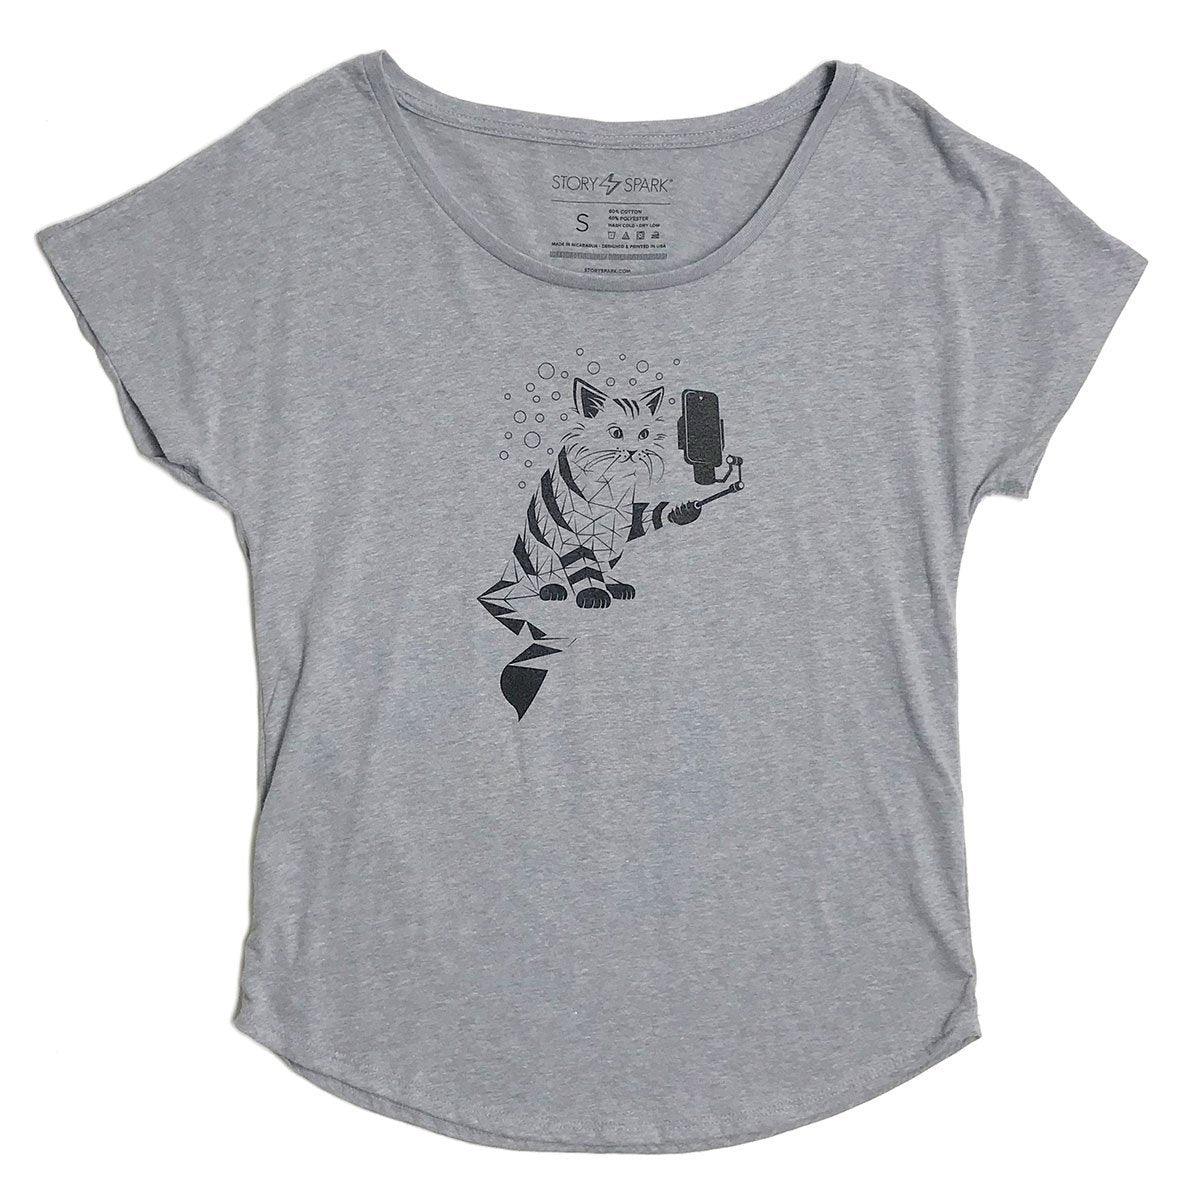 Download Snap Cat Womens Graphic T-Shirt for Cat Lovers - STORY SPARK